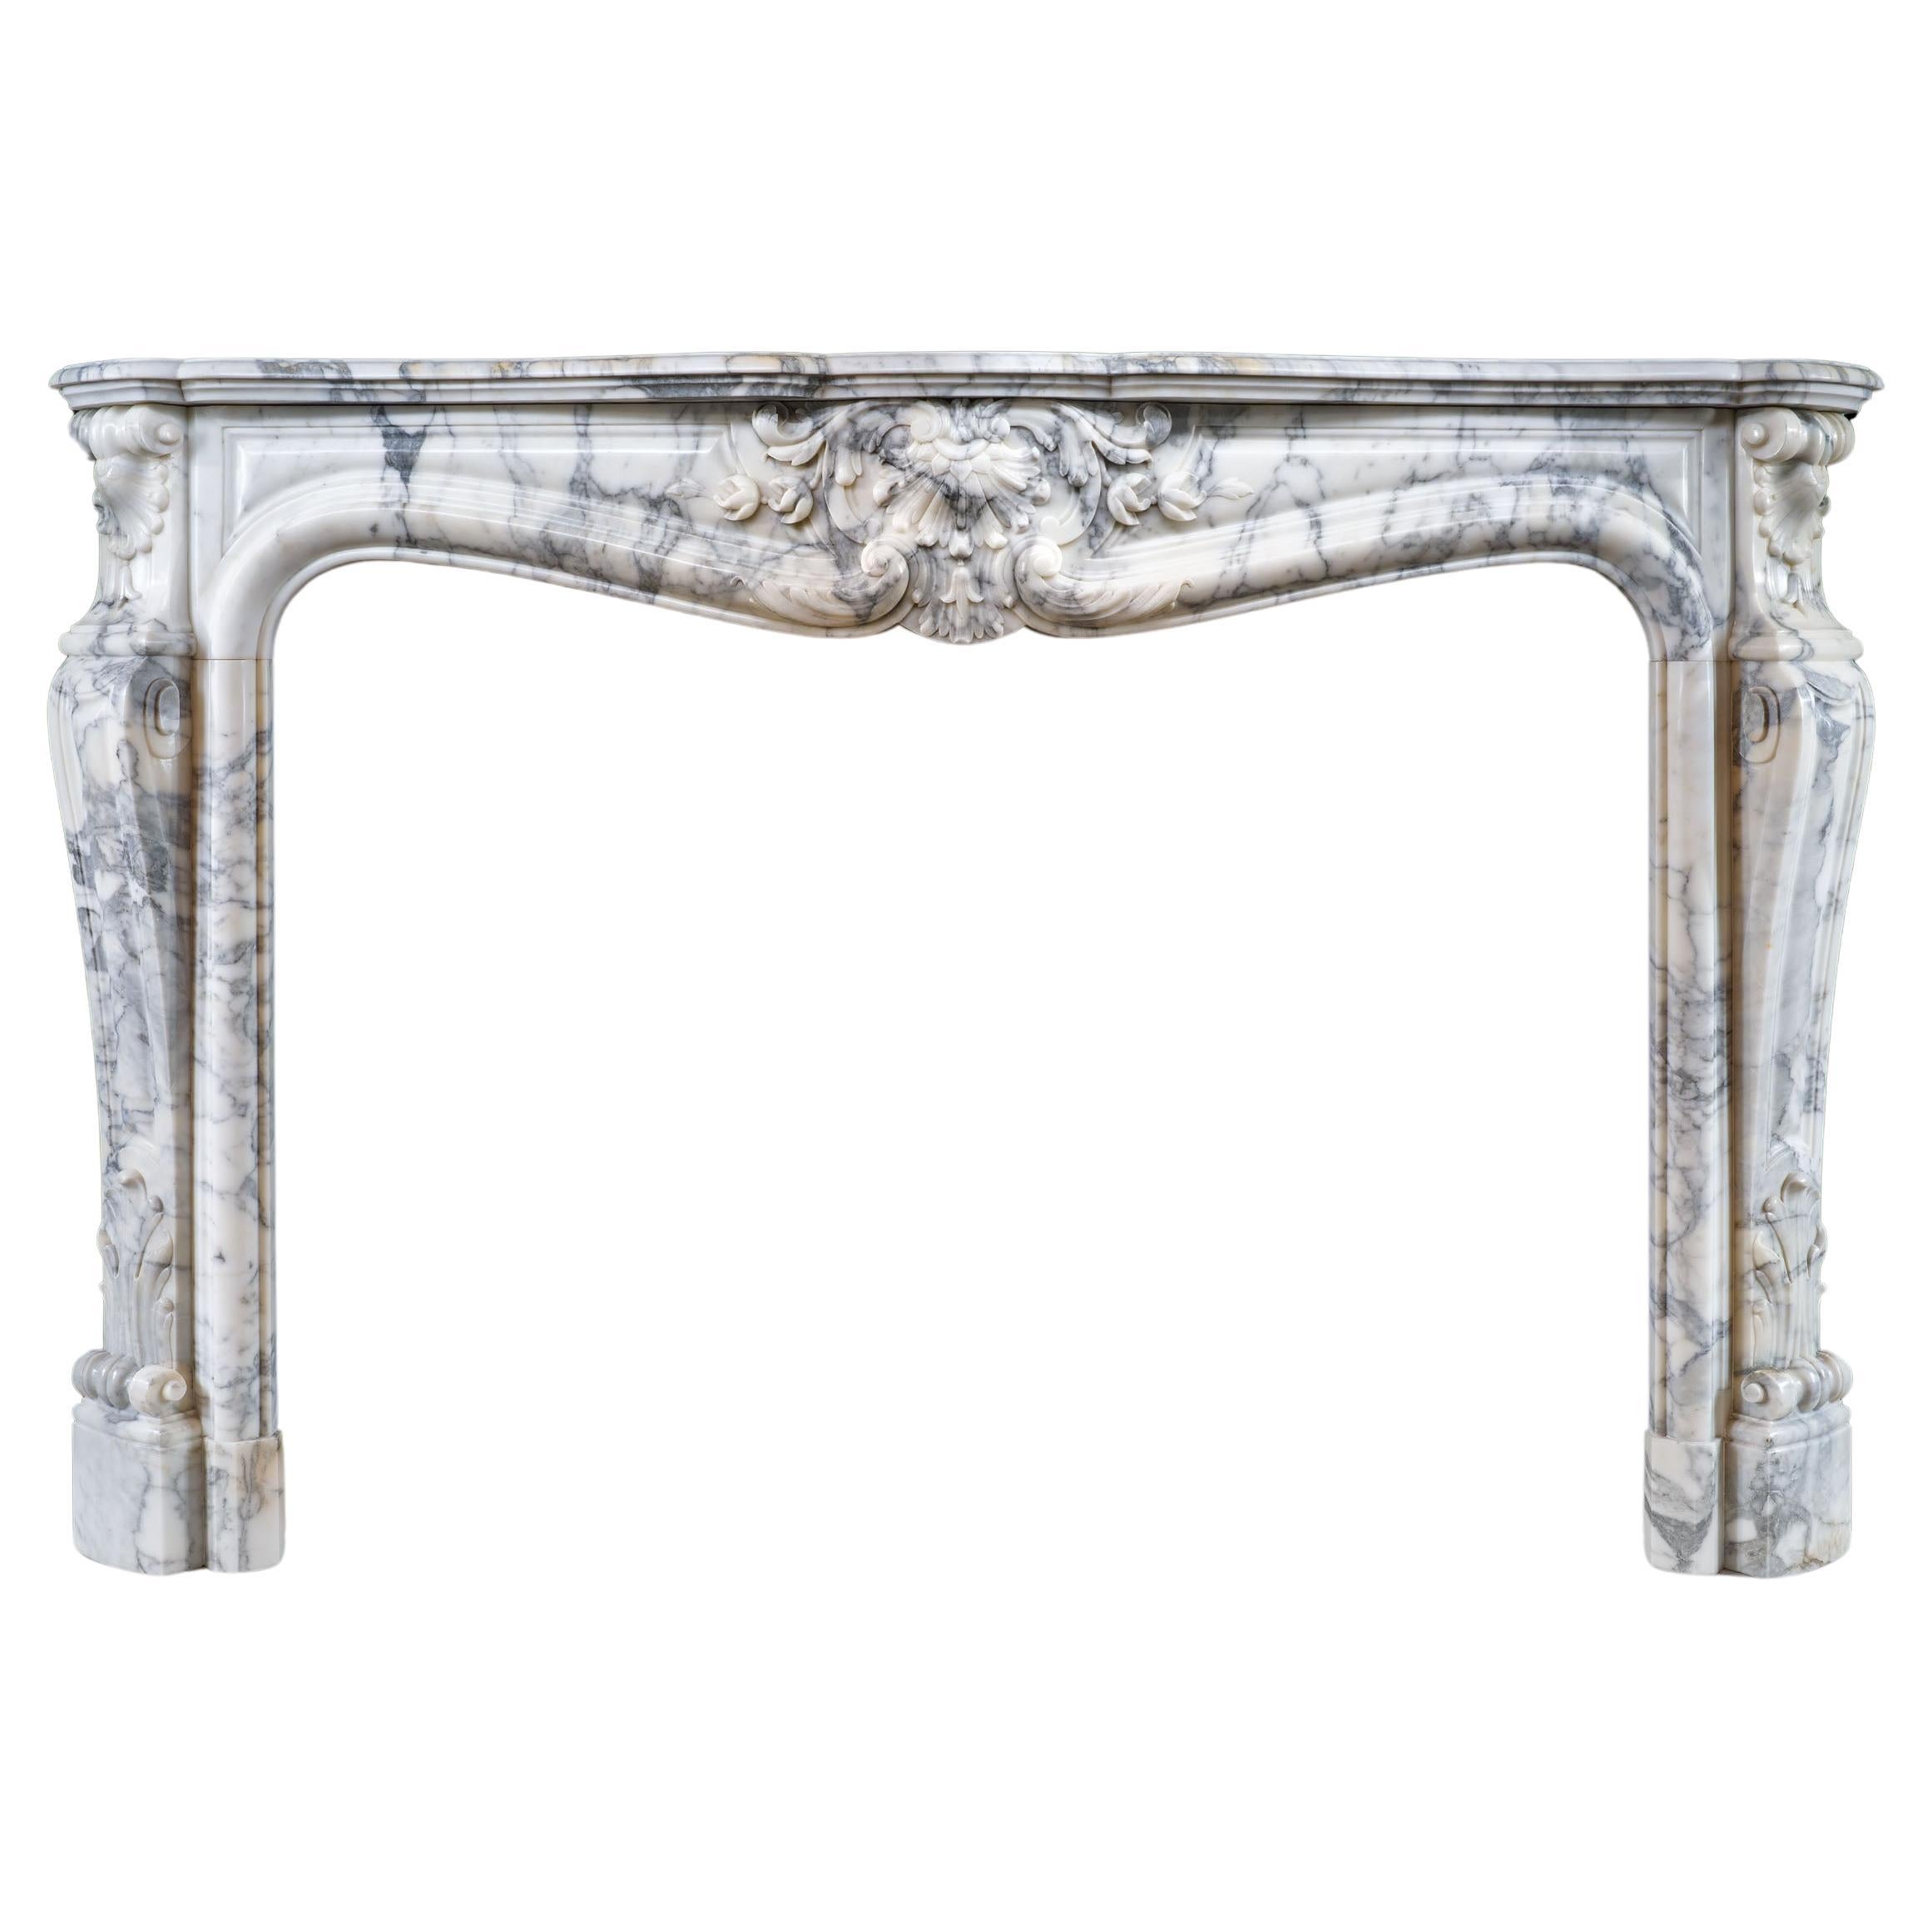 French Arabescato Marble Rococo Fireplace For Sale